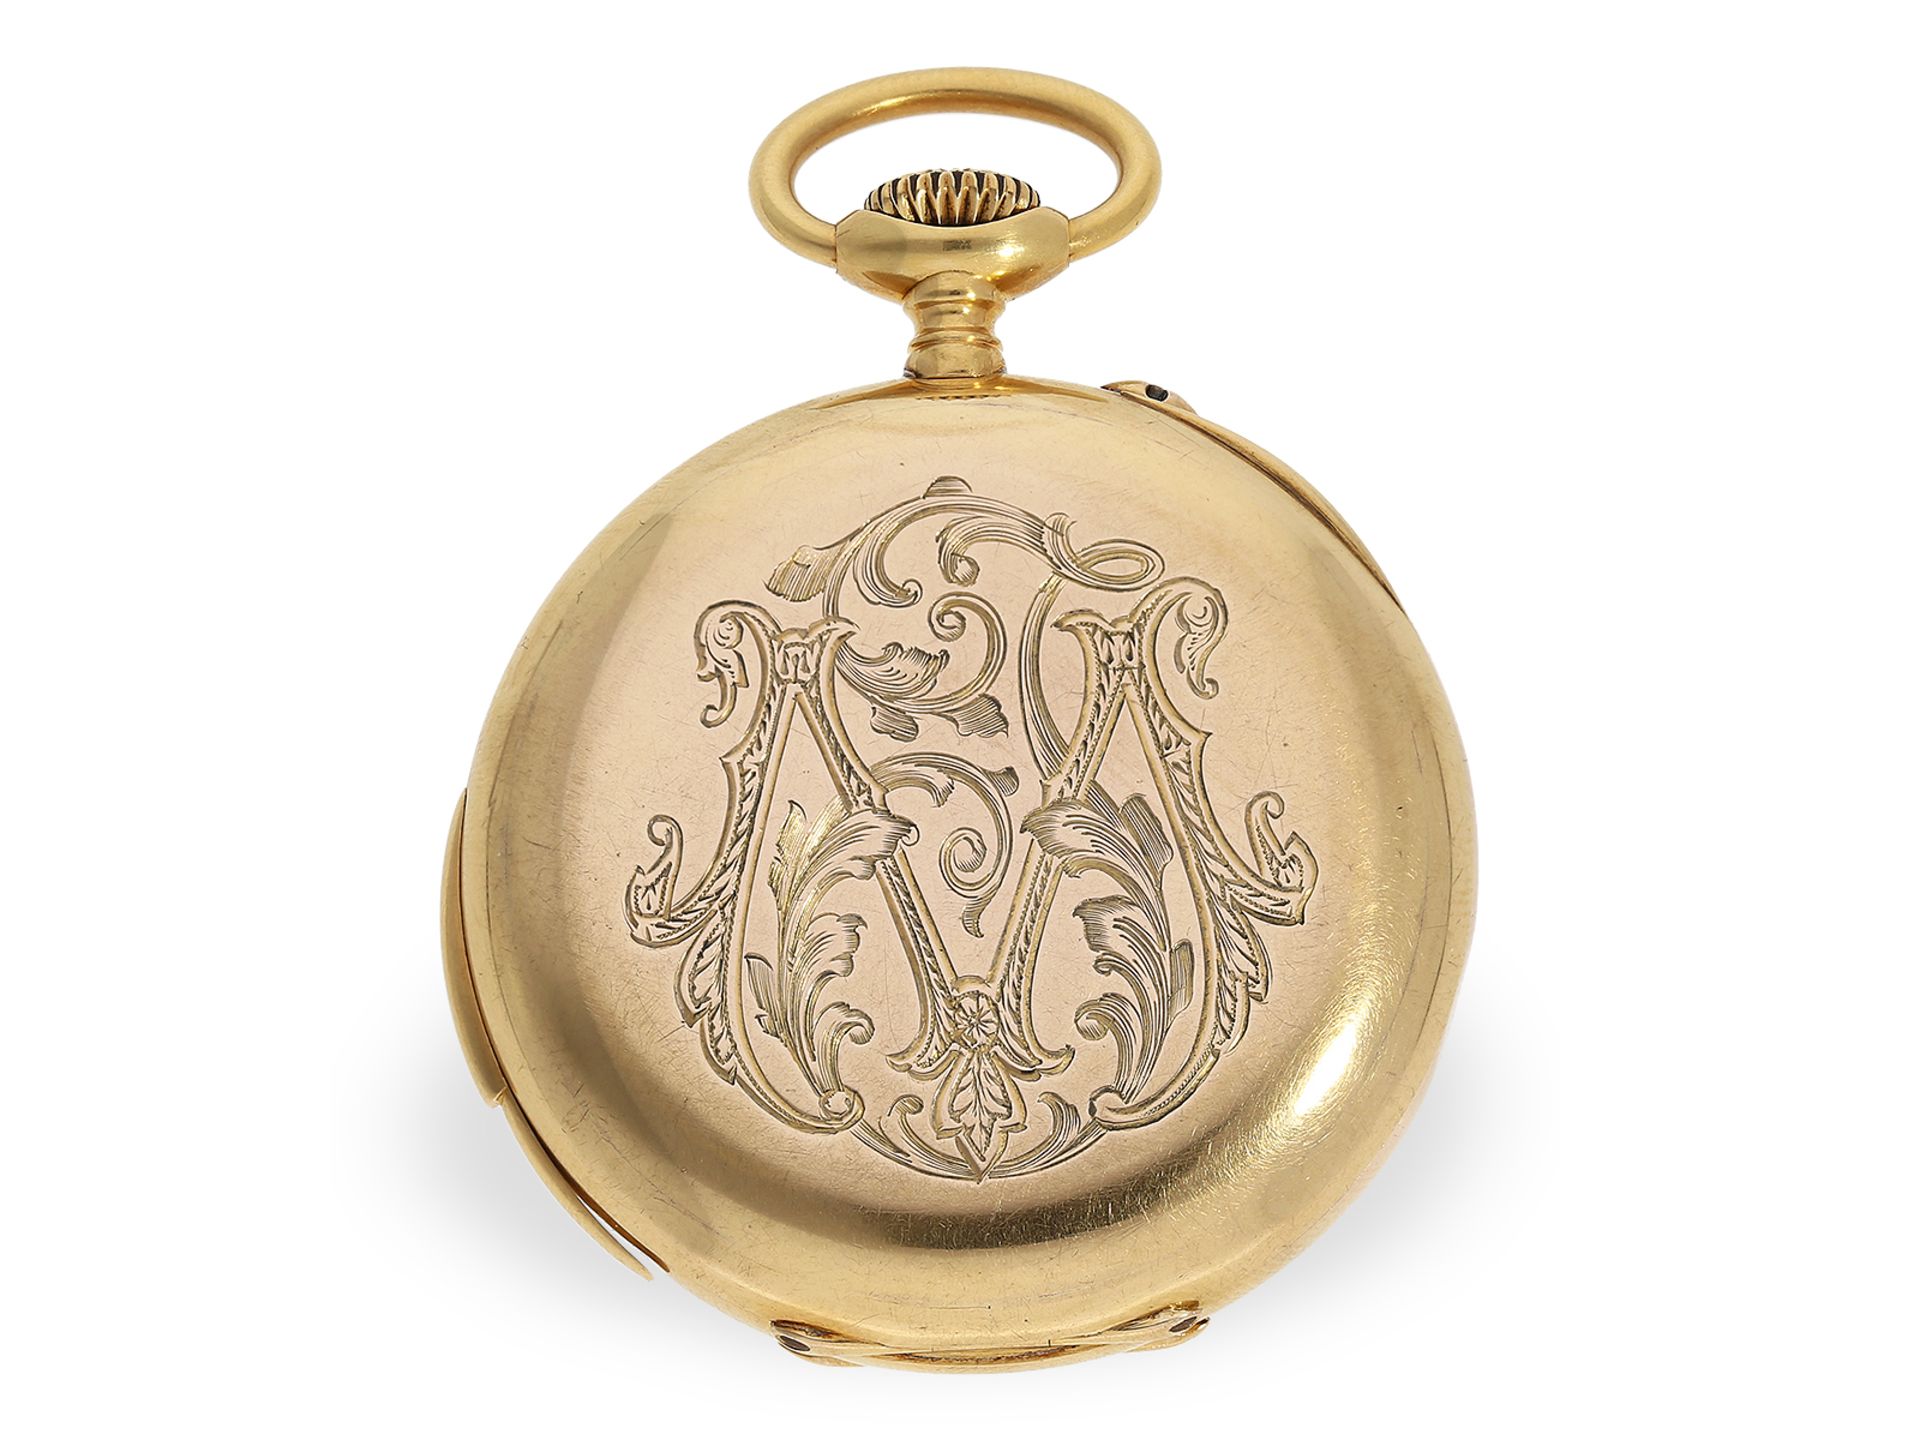 Fine 18K precision pocket watch with quarter repeater, probably Le Coultre, ca. 1900 - Image 5 of 5